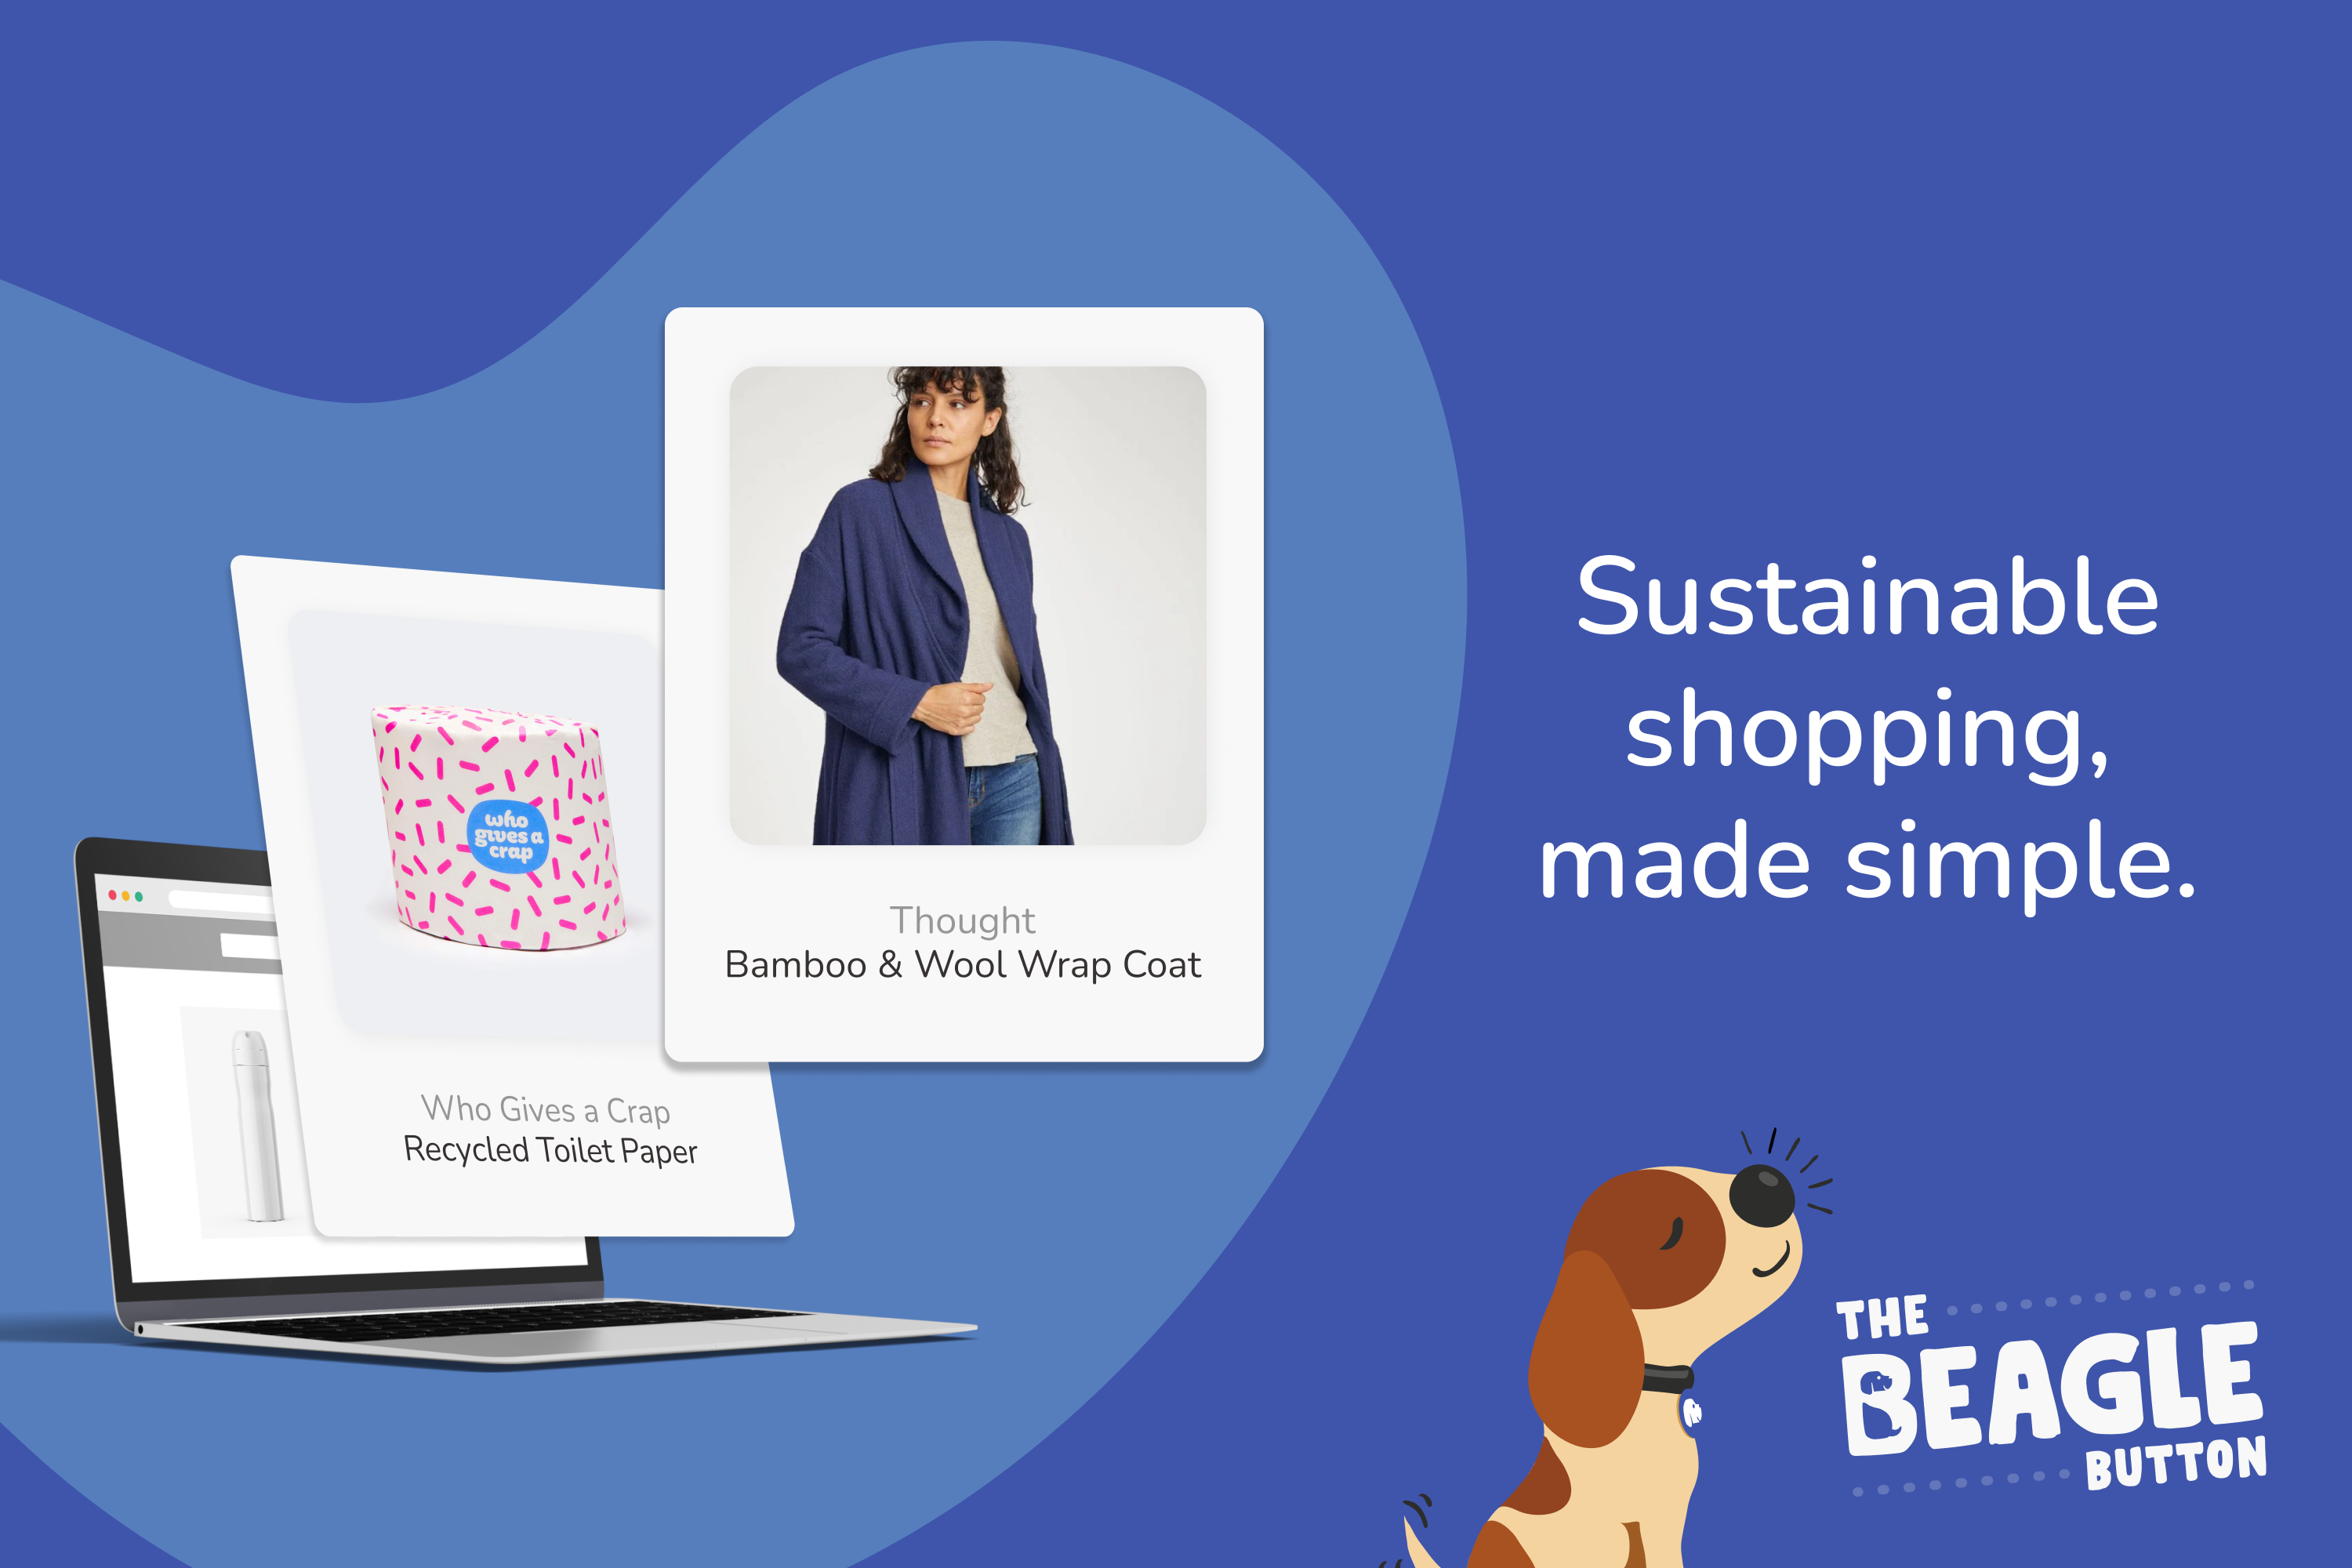 How To Shop More Sustainably With The Beagle Button